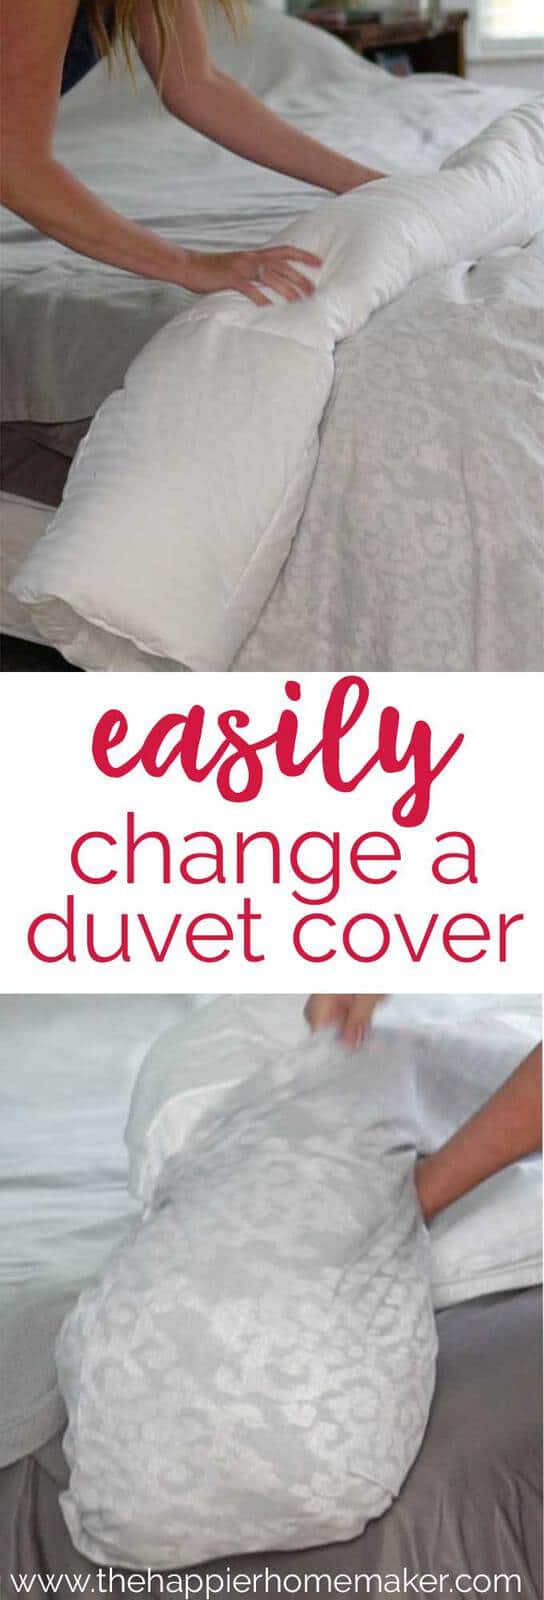 collage changing duvet cover with text reading easily change a duvet cover